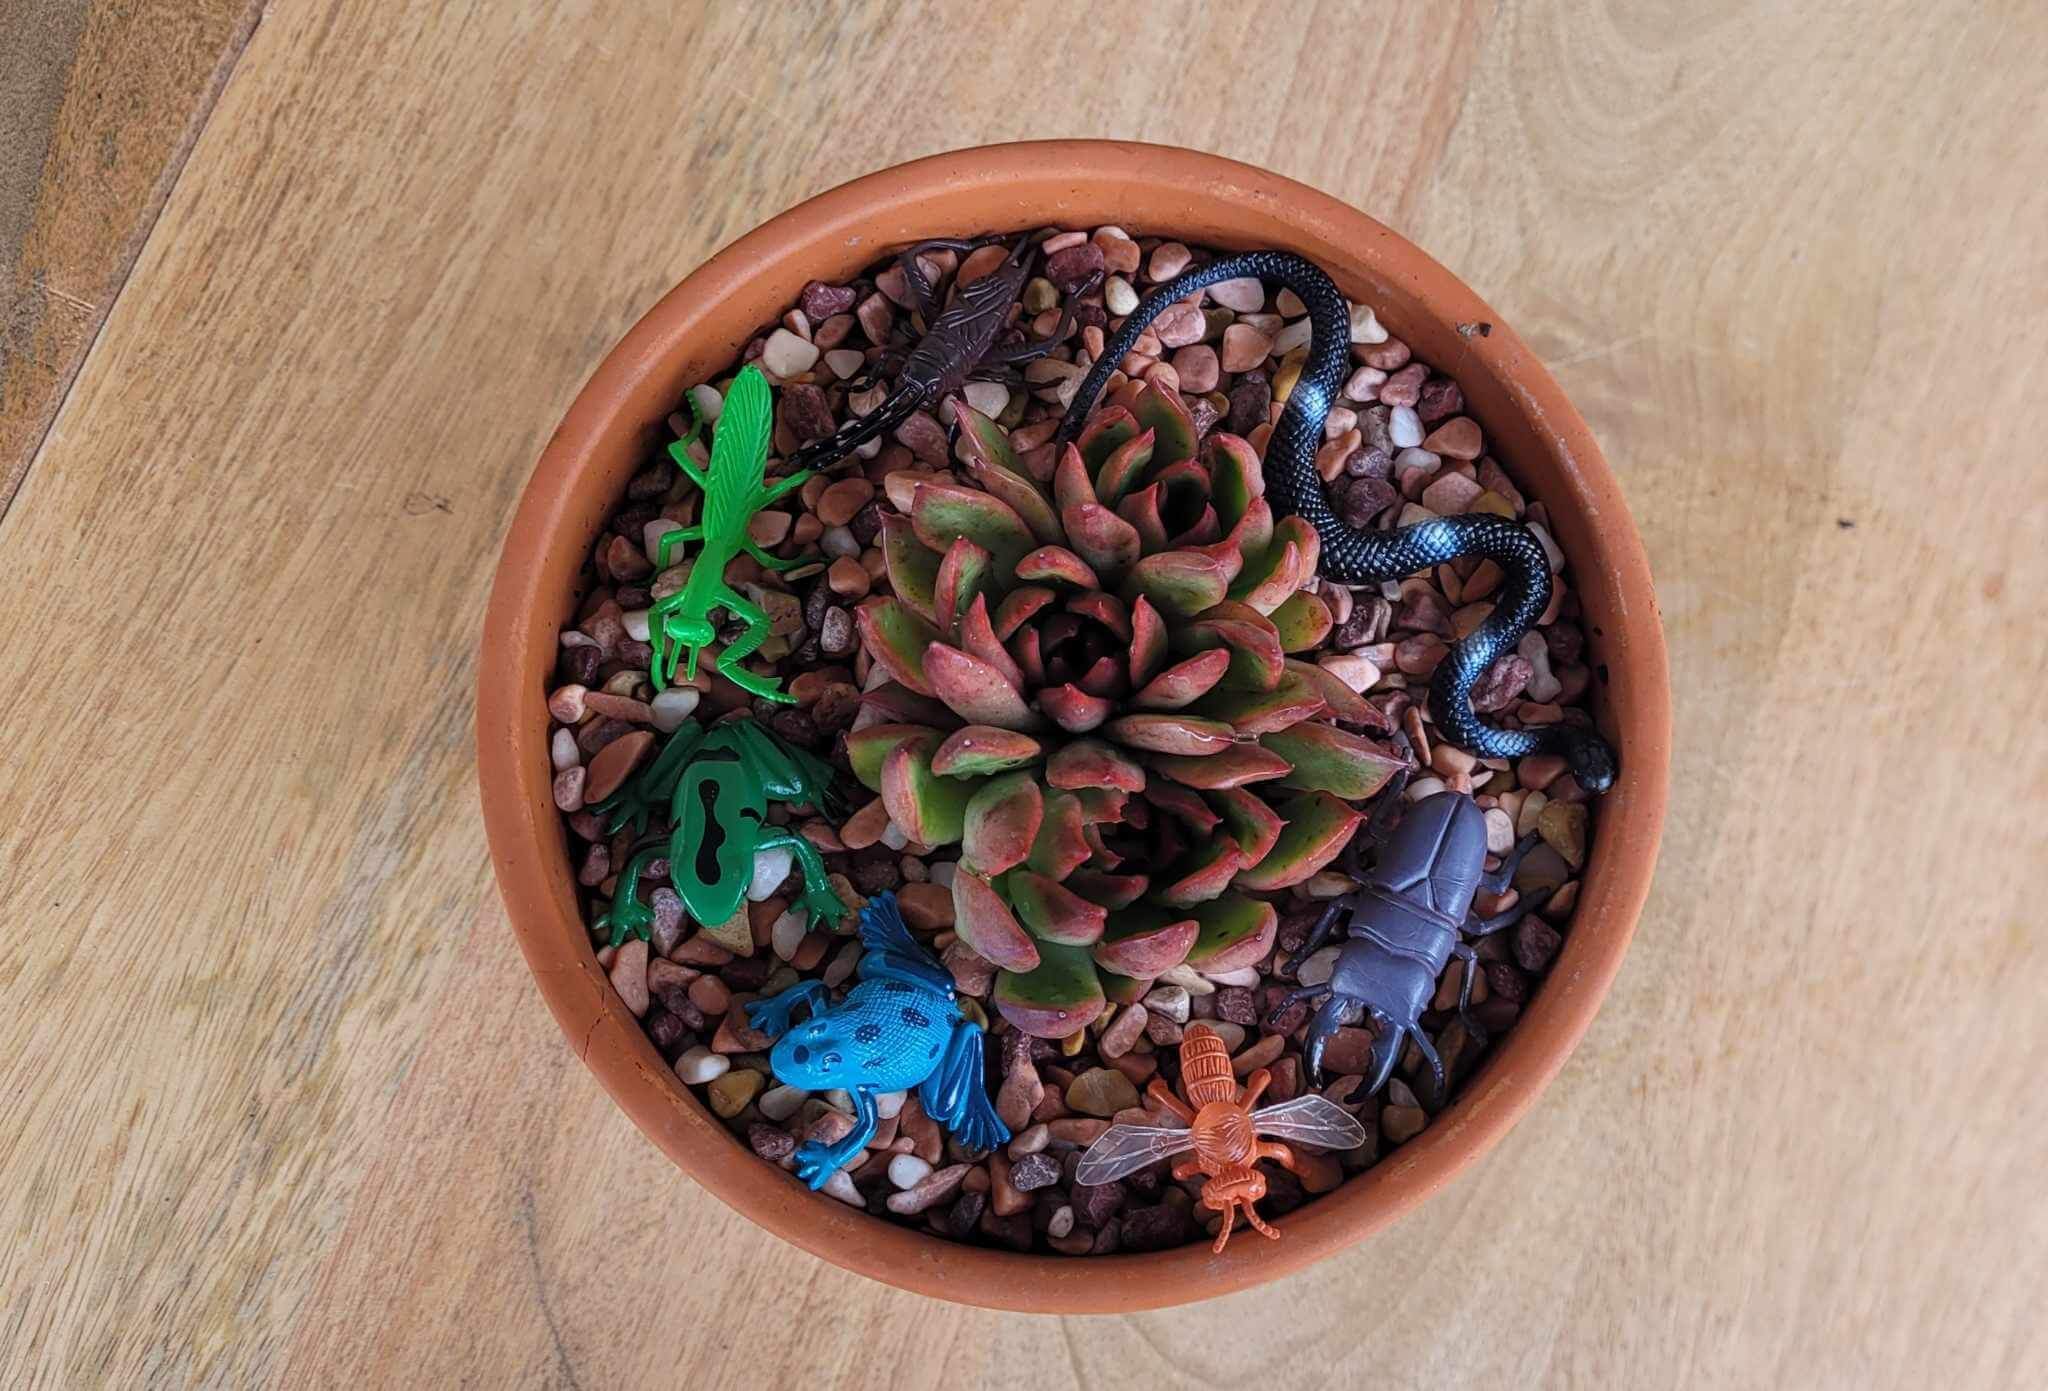 Birds eye view of a small clay pot plant on a wood table with plastic animals in it.